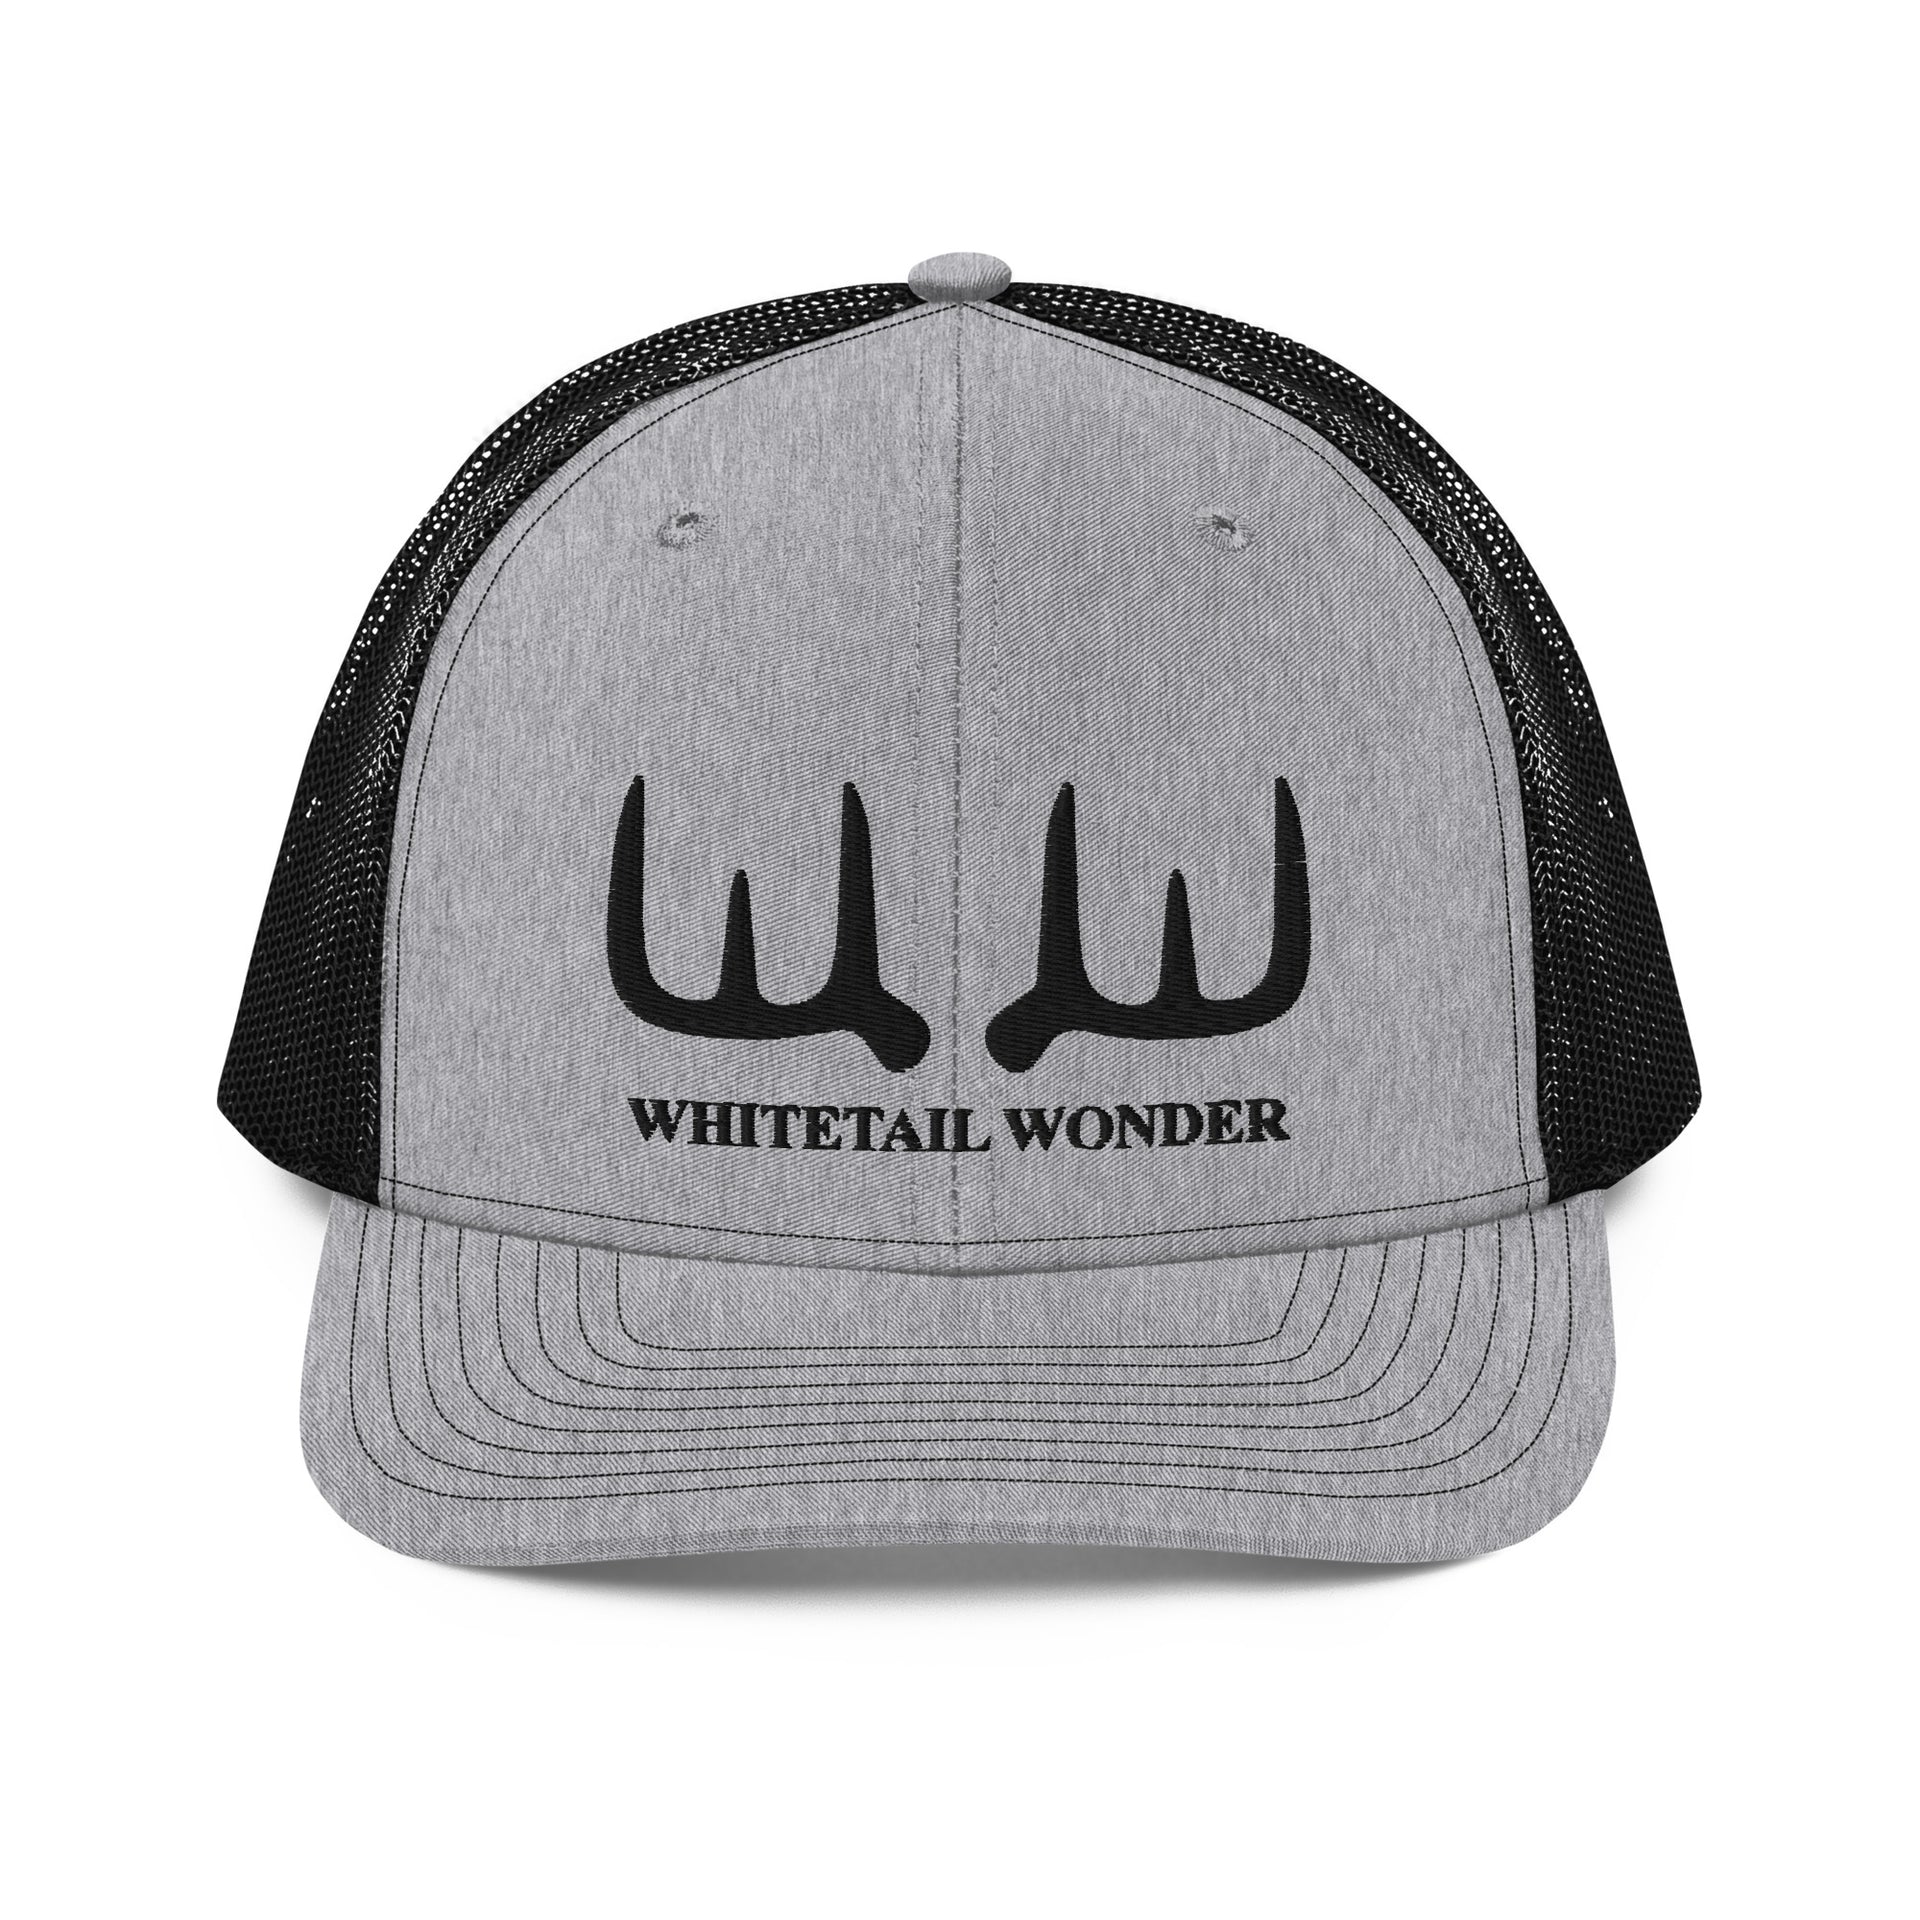 Legendary Whitetails Corded Trucker Hat Grey Cotton Twill/Polyester Mesh